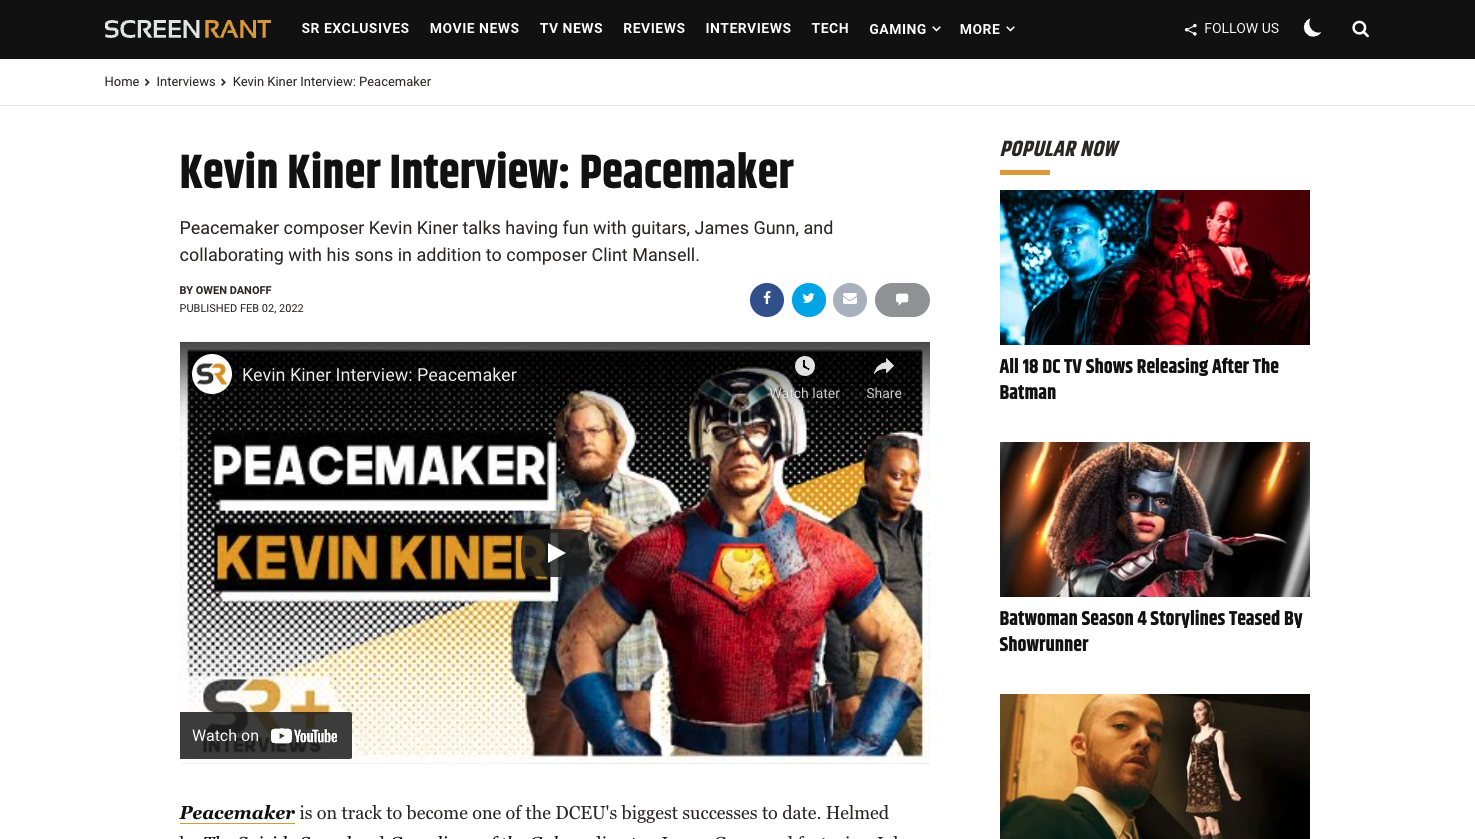 Kevin Kiner Interview: Peacemaker